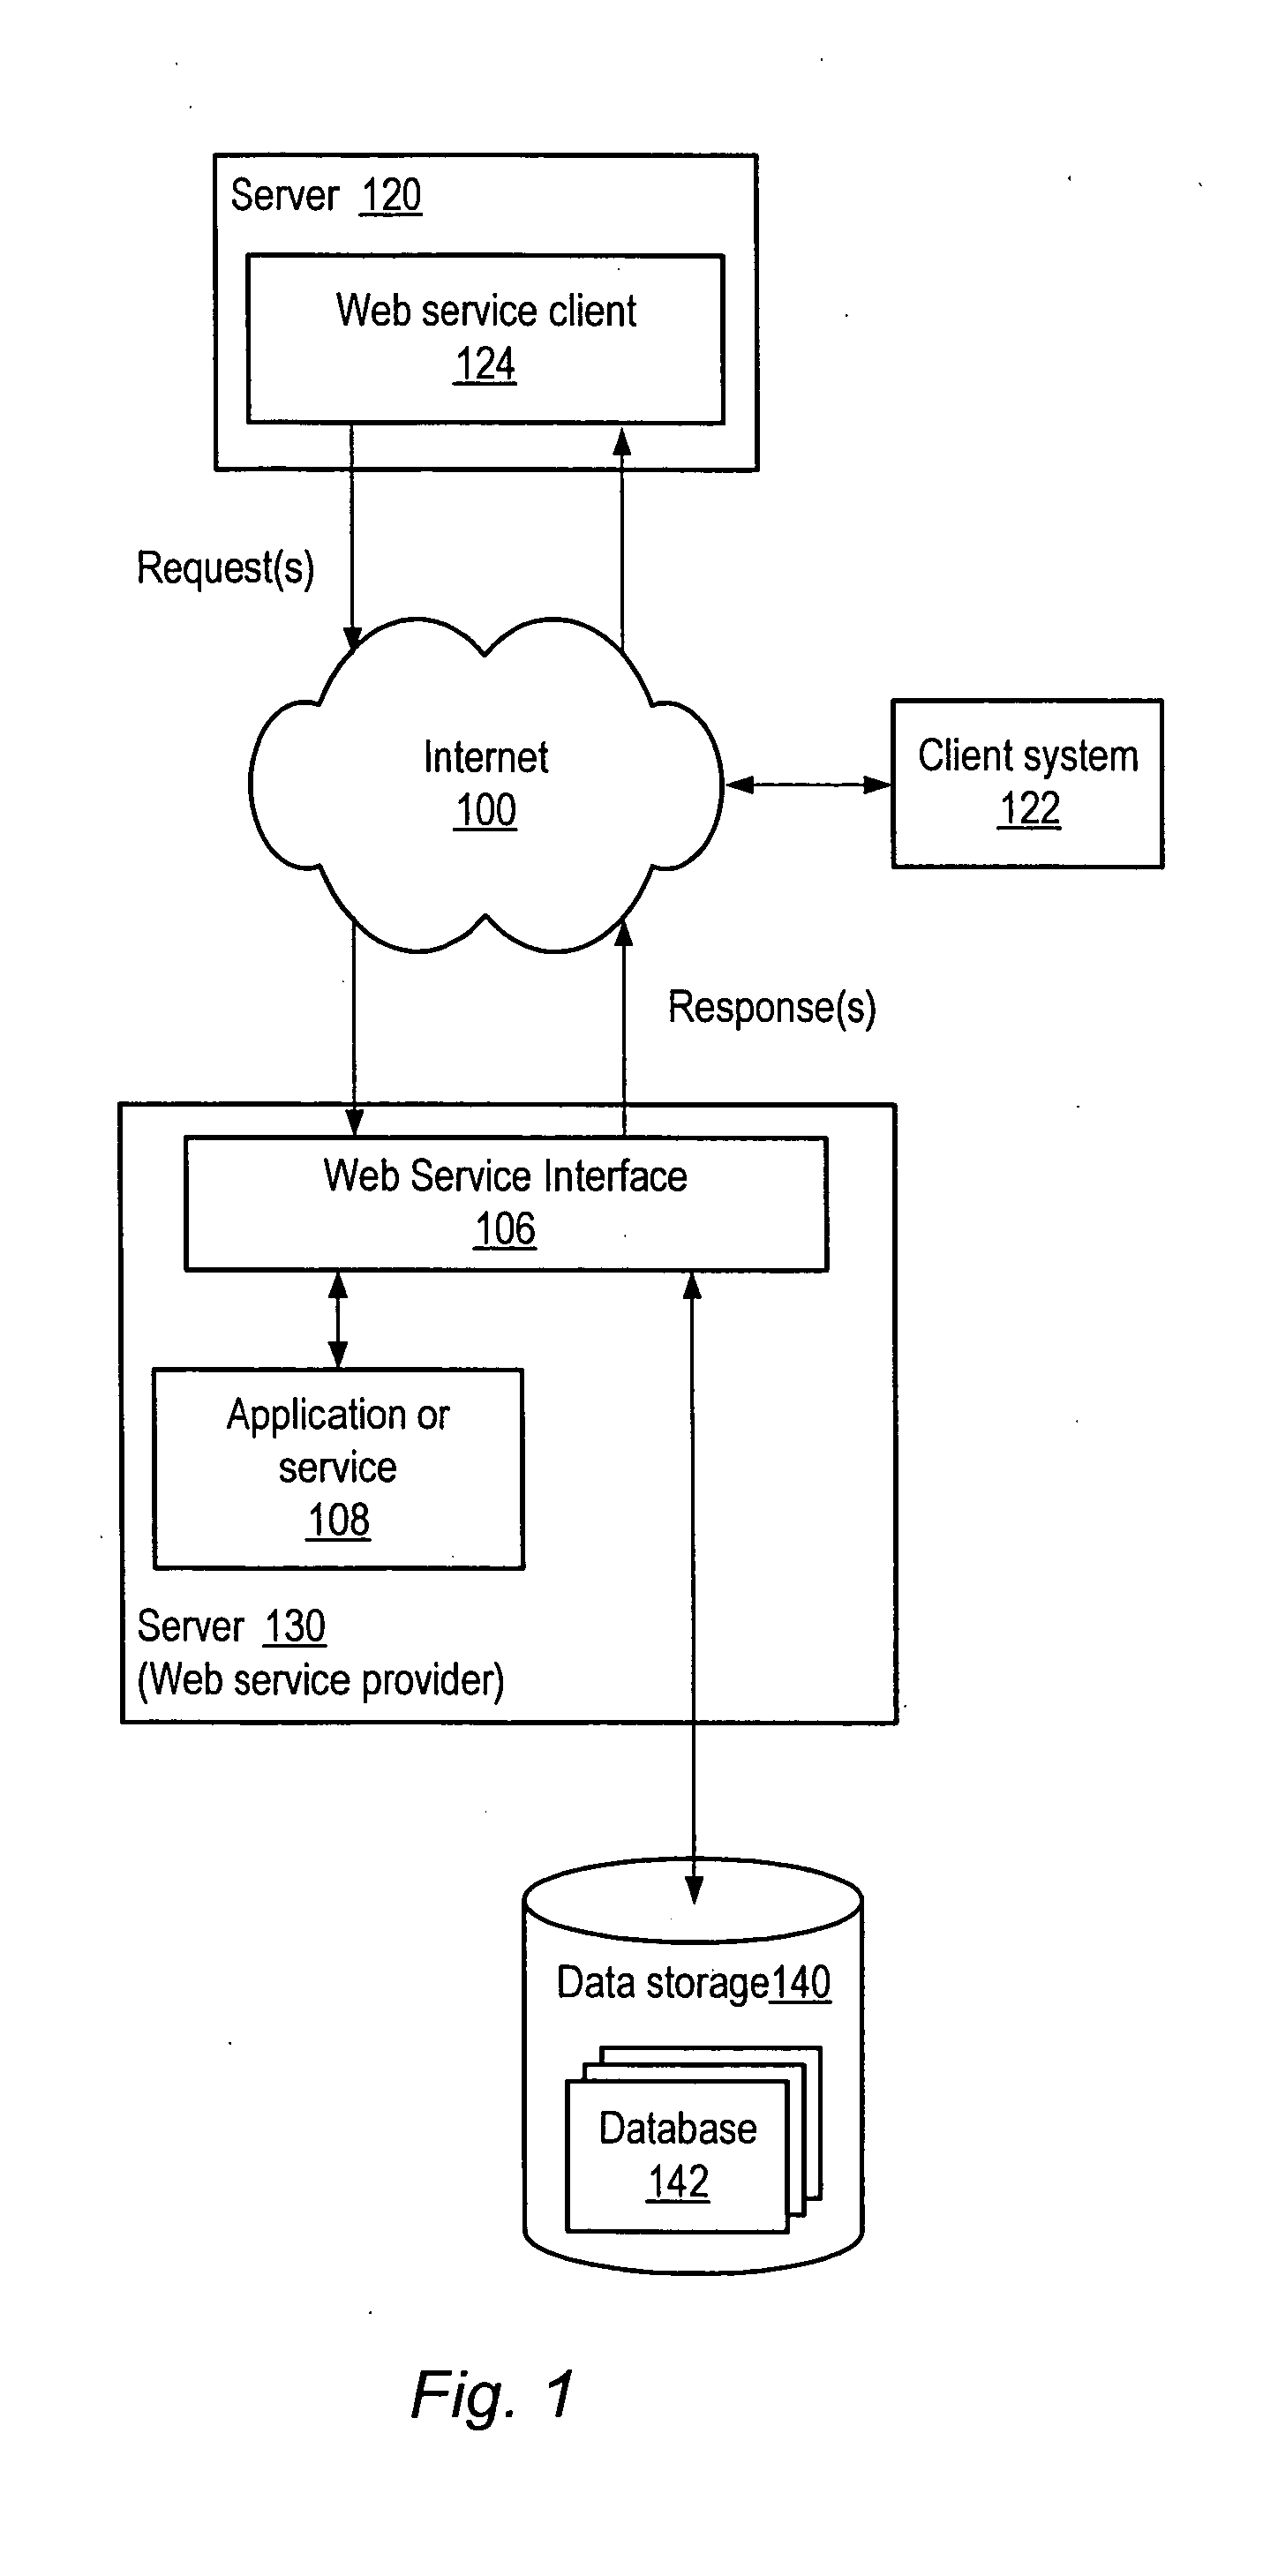 Method and apparatus for a searchable data service